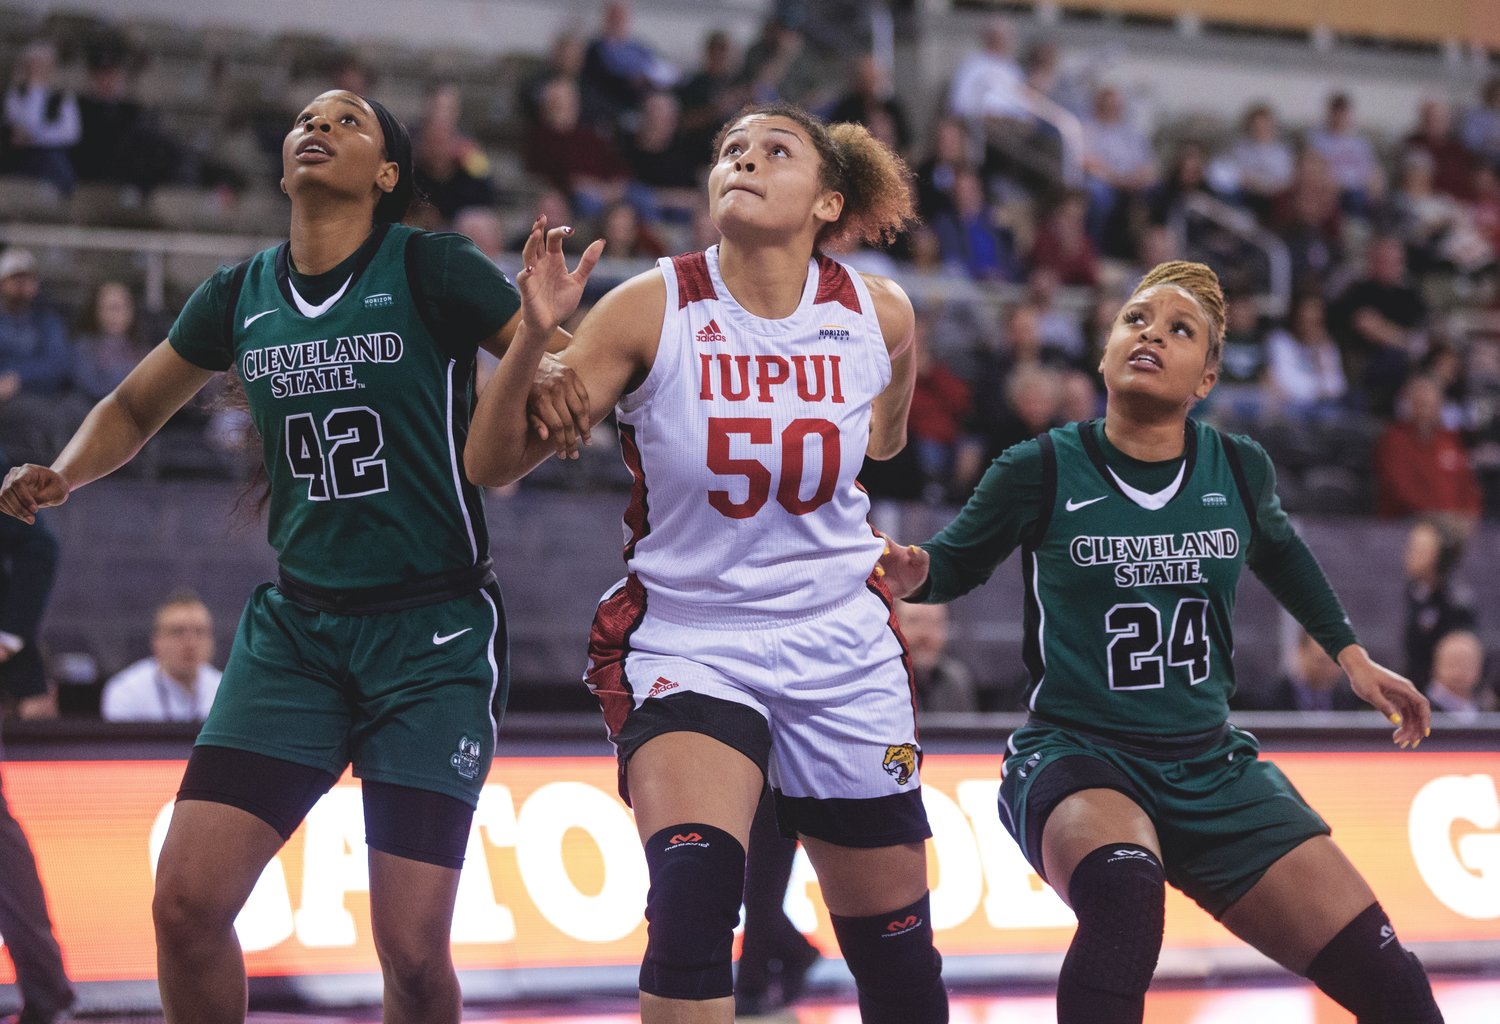 Macee Williams had a double-double in IUPUI's 71-54 win over Cleveland State on Monday afternoon to advance to the Horizon League Women's Basketball Championship.